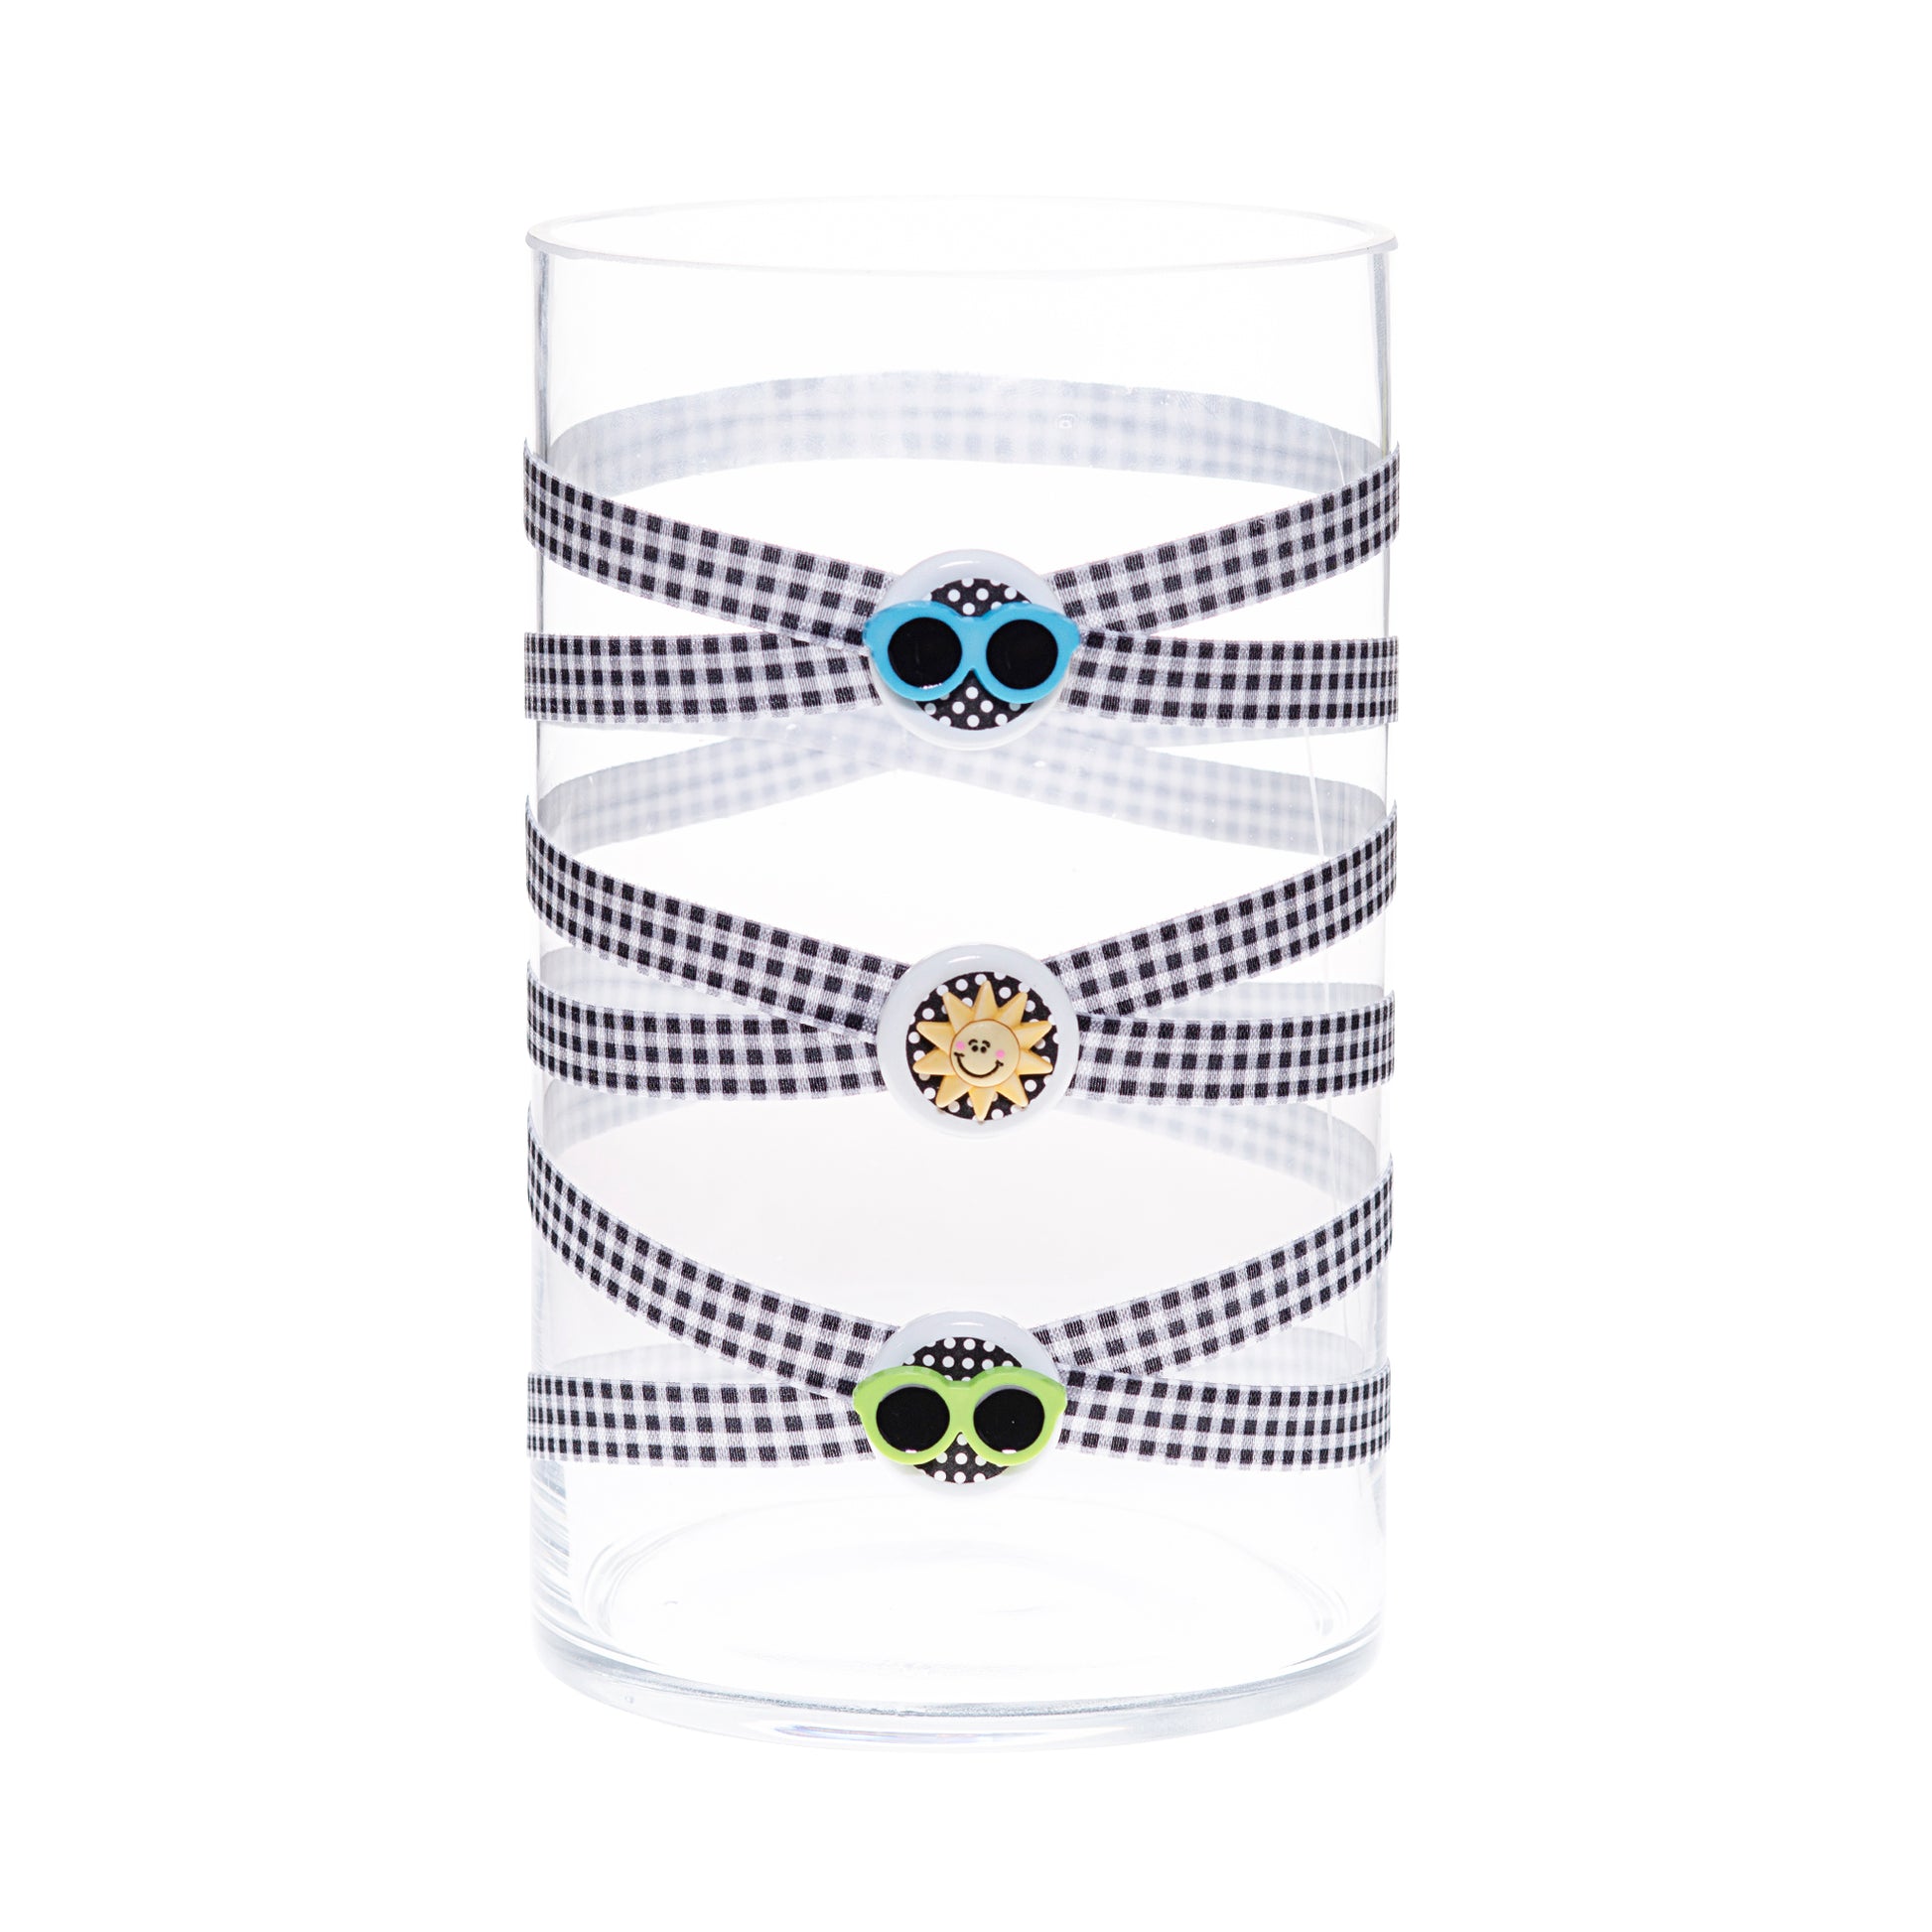 Front of Glass Wrappings 6" x 10" cylinder wrapped in black & white check elastic, decorated with 2 colorful sunglasses and a smiley sun.